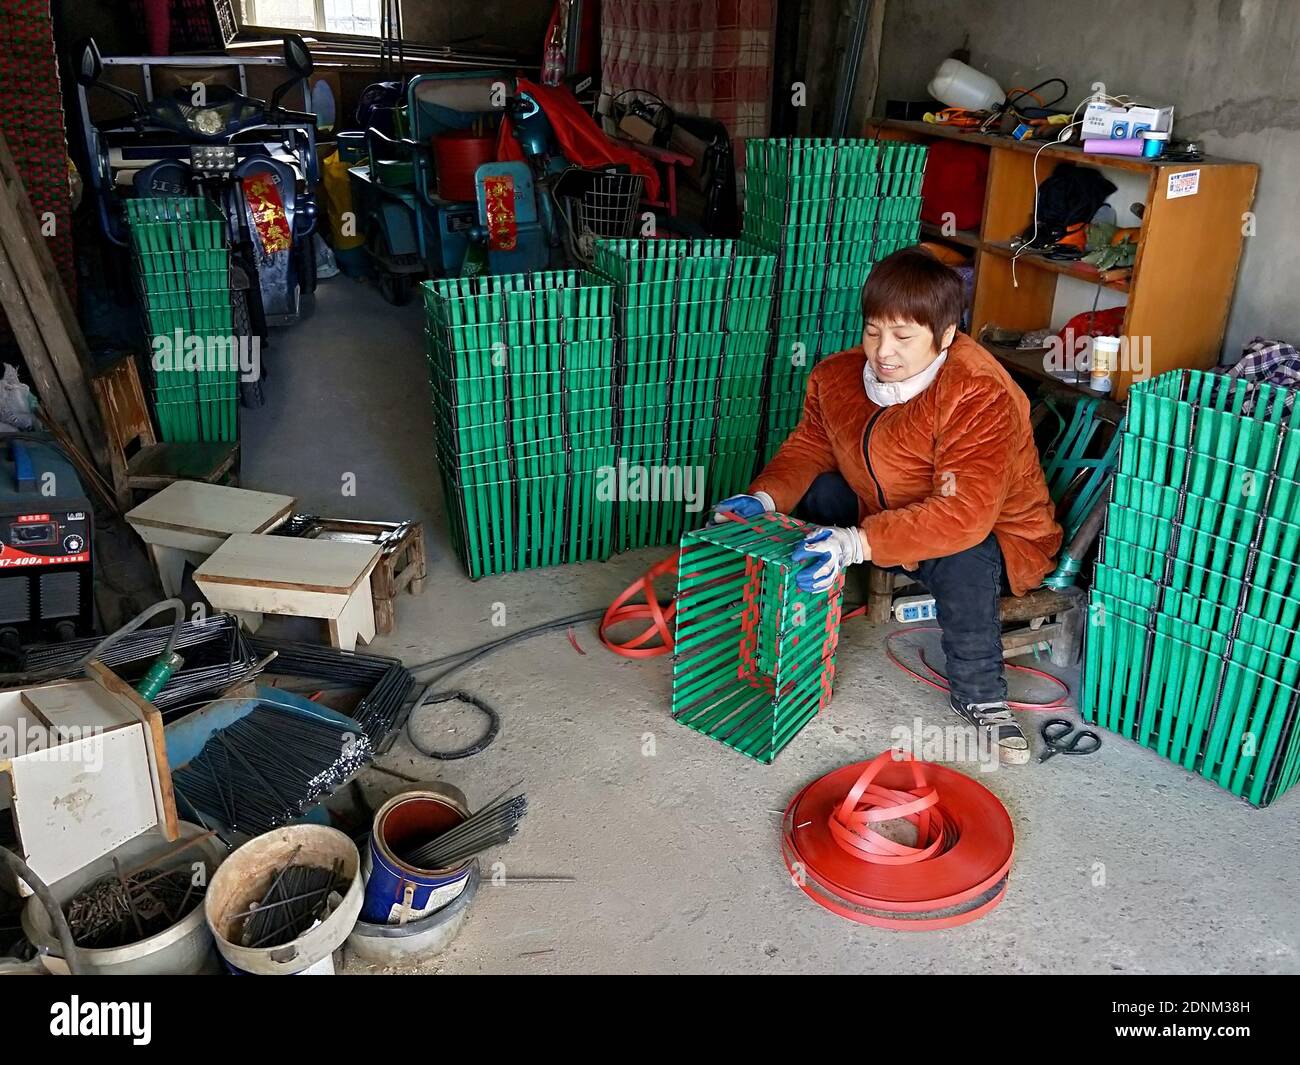 Yunmeng, Yunmeng, China. 18th Dec, 2020. Hubei, CHINA-On December 16, 2020, in Xiaogan City, Hubei Province, yuan Jinying, a disabled man with double legs, welded and woven steel frame basket at home.Disabled as she was, she not only made the house clean and tidy with her hardworking hands, but also helped her son finish his college education and finally lifted the family out of poverty.Introduced by villagers and friends, Yuan jinying's small workshop became increasingly famous.In 2018, the annual income of the small workshop reached 6,000 yuan, and Yuan Jinying became a banner of po Stock Photo